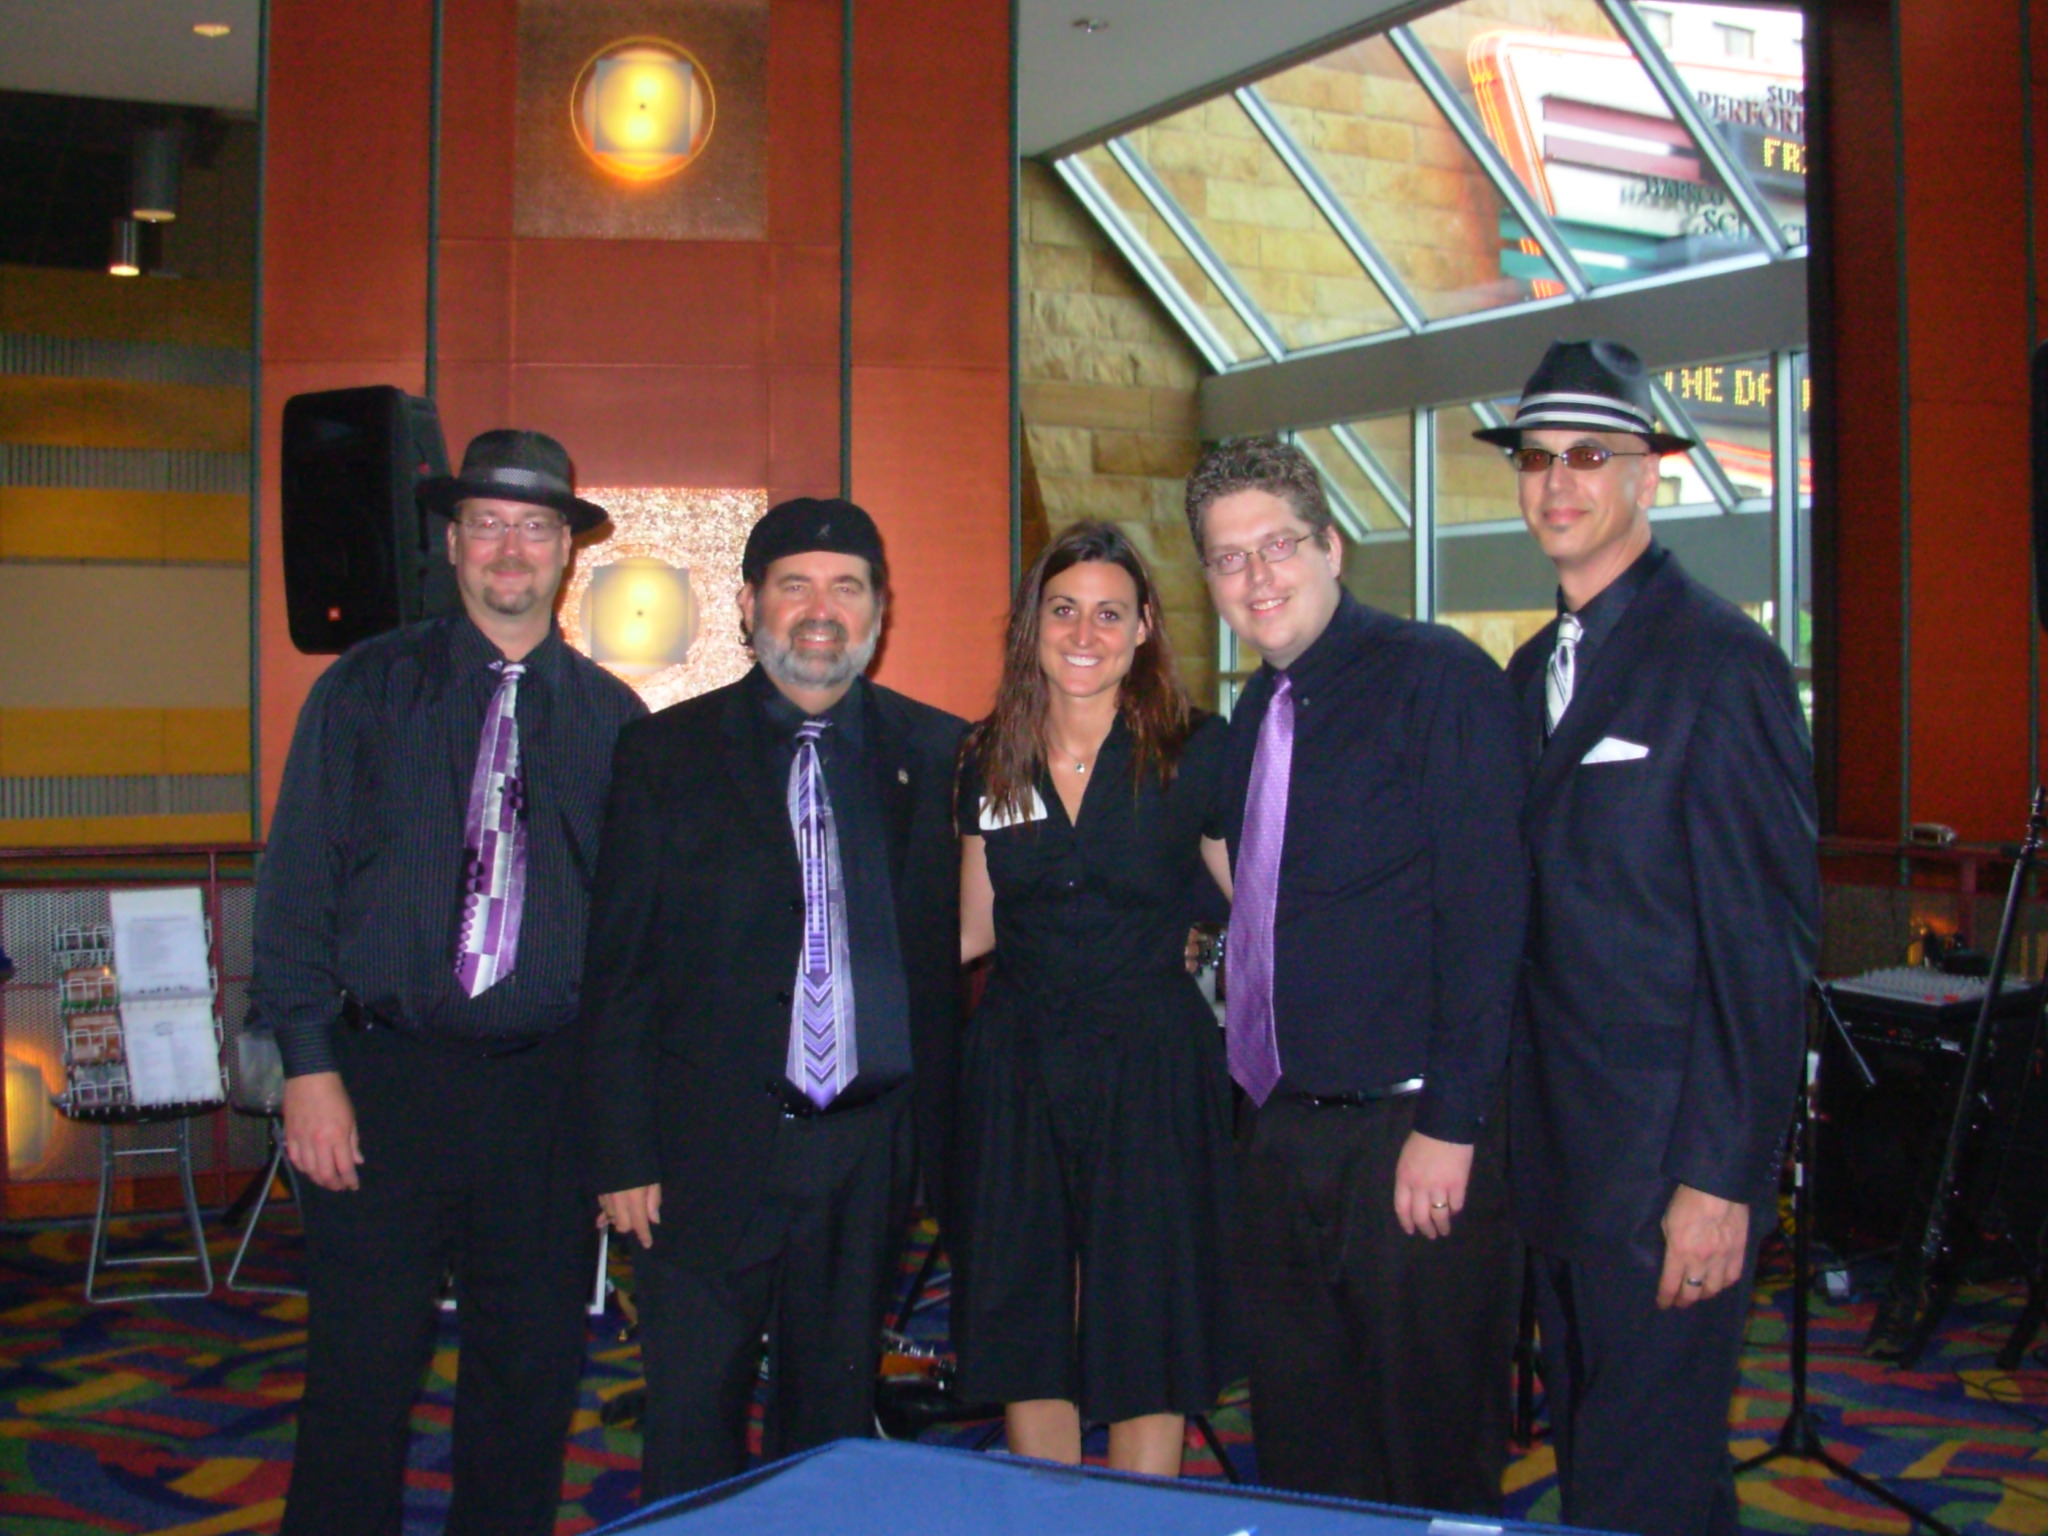 Arthritis Foundation Event at the Whitaker Center 2008
